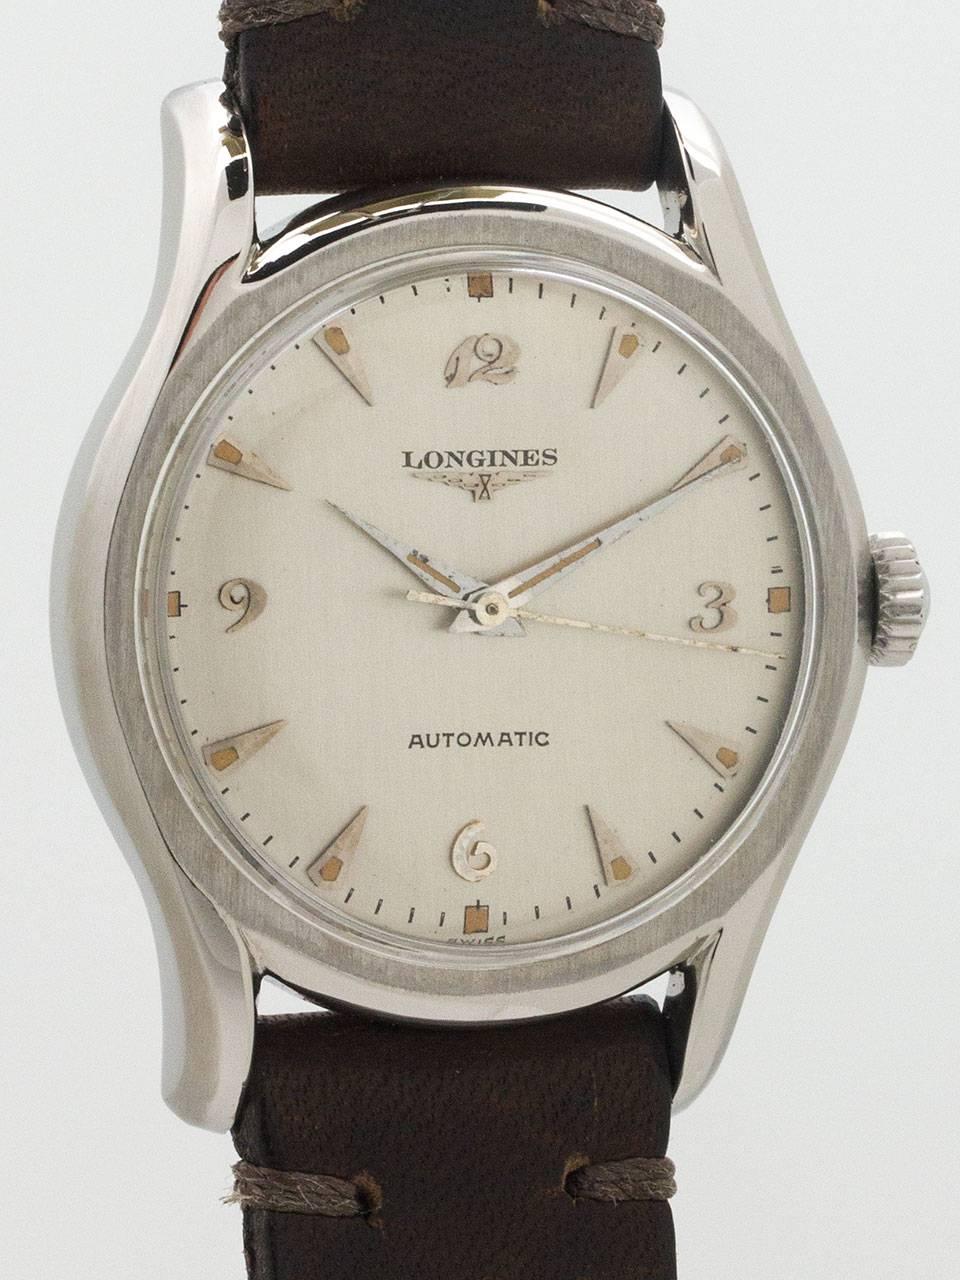 Vintage Longines Stainless Steel Automatic Wristwatch circa 1958. Featuring 34 X 42mm diameter case with curved and extended bombay style lugs. Very nice looking professionally restored matte silver dial with applied silver breguet and tapered